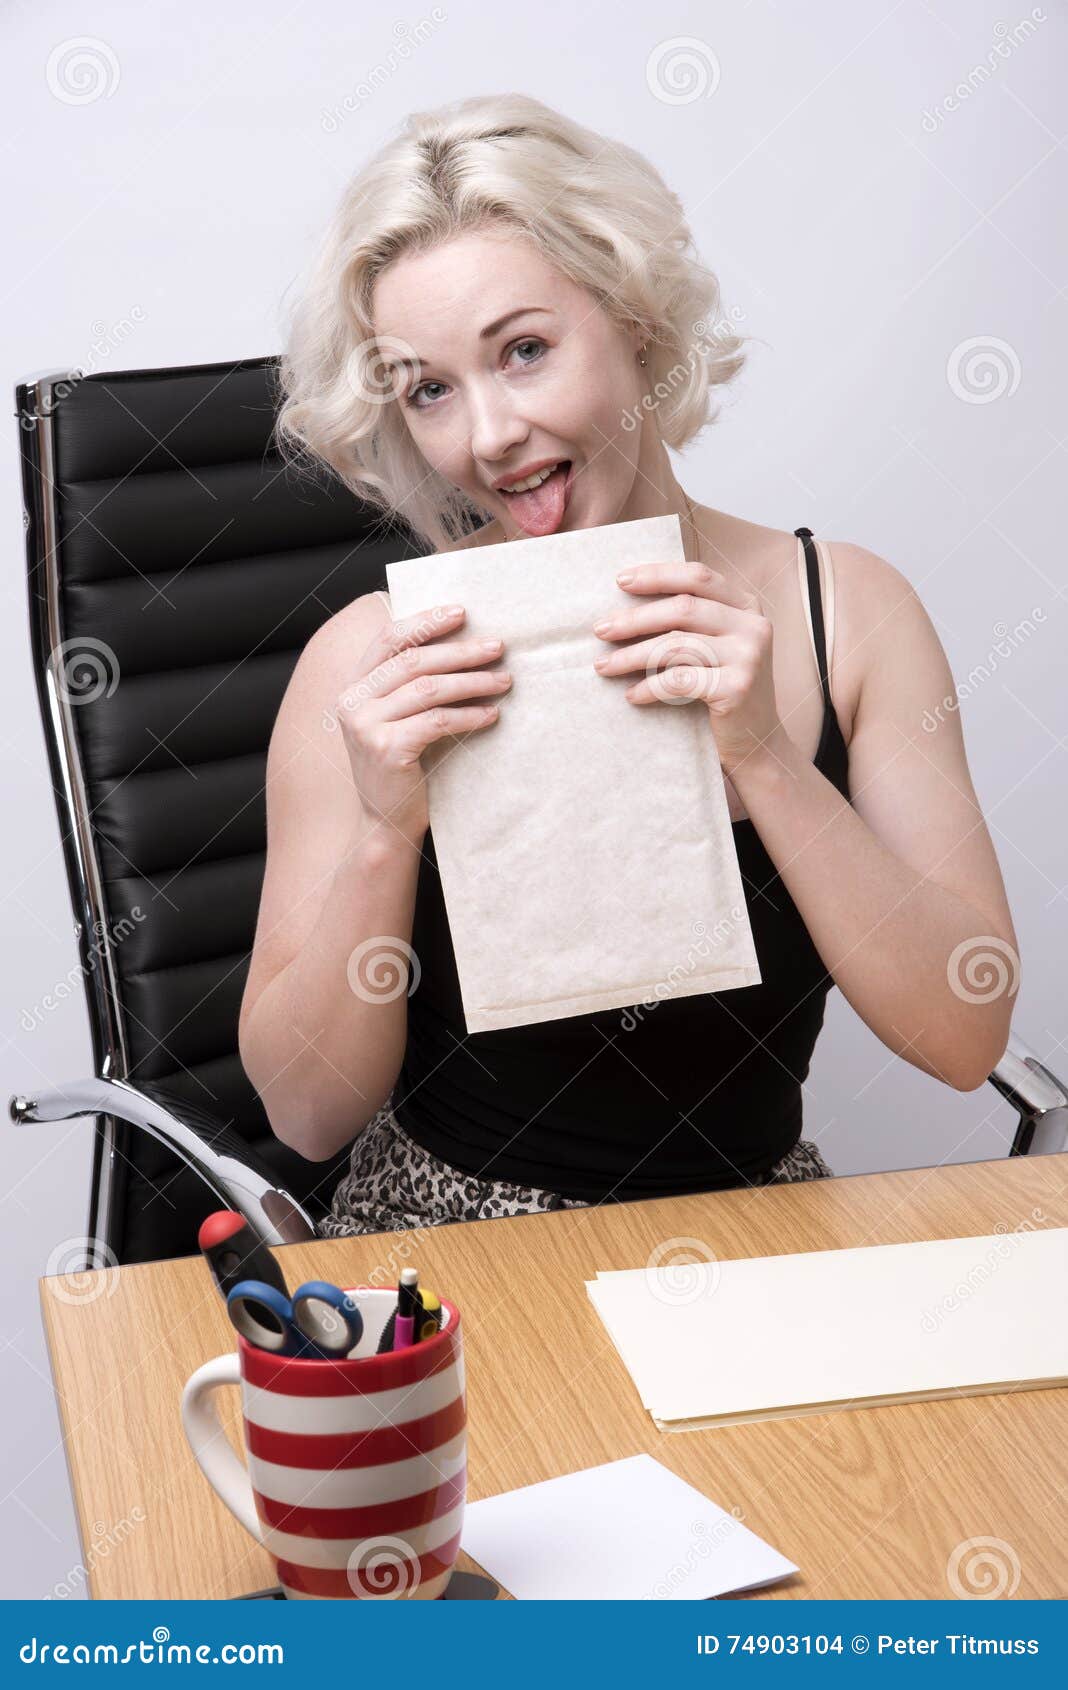 work from home licking envelopes